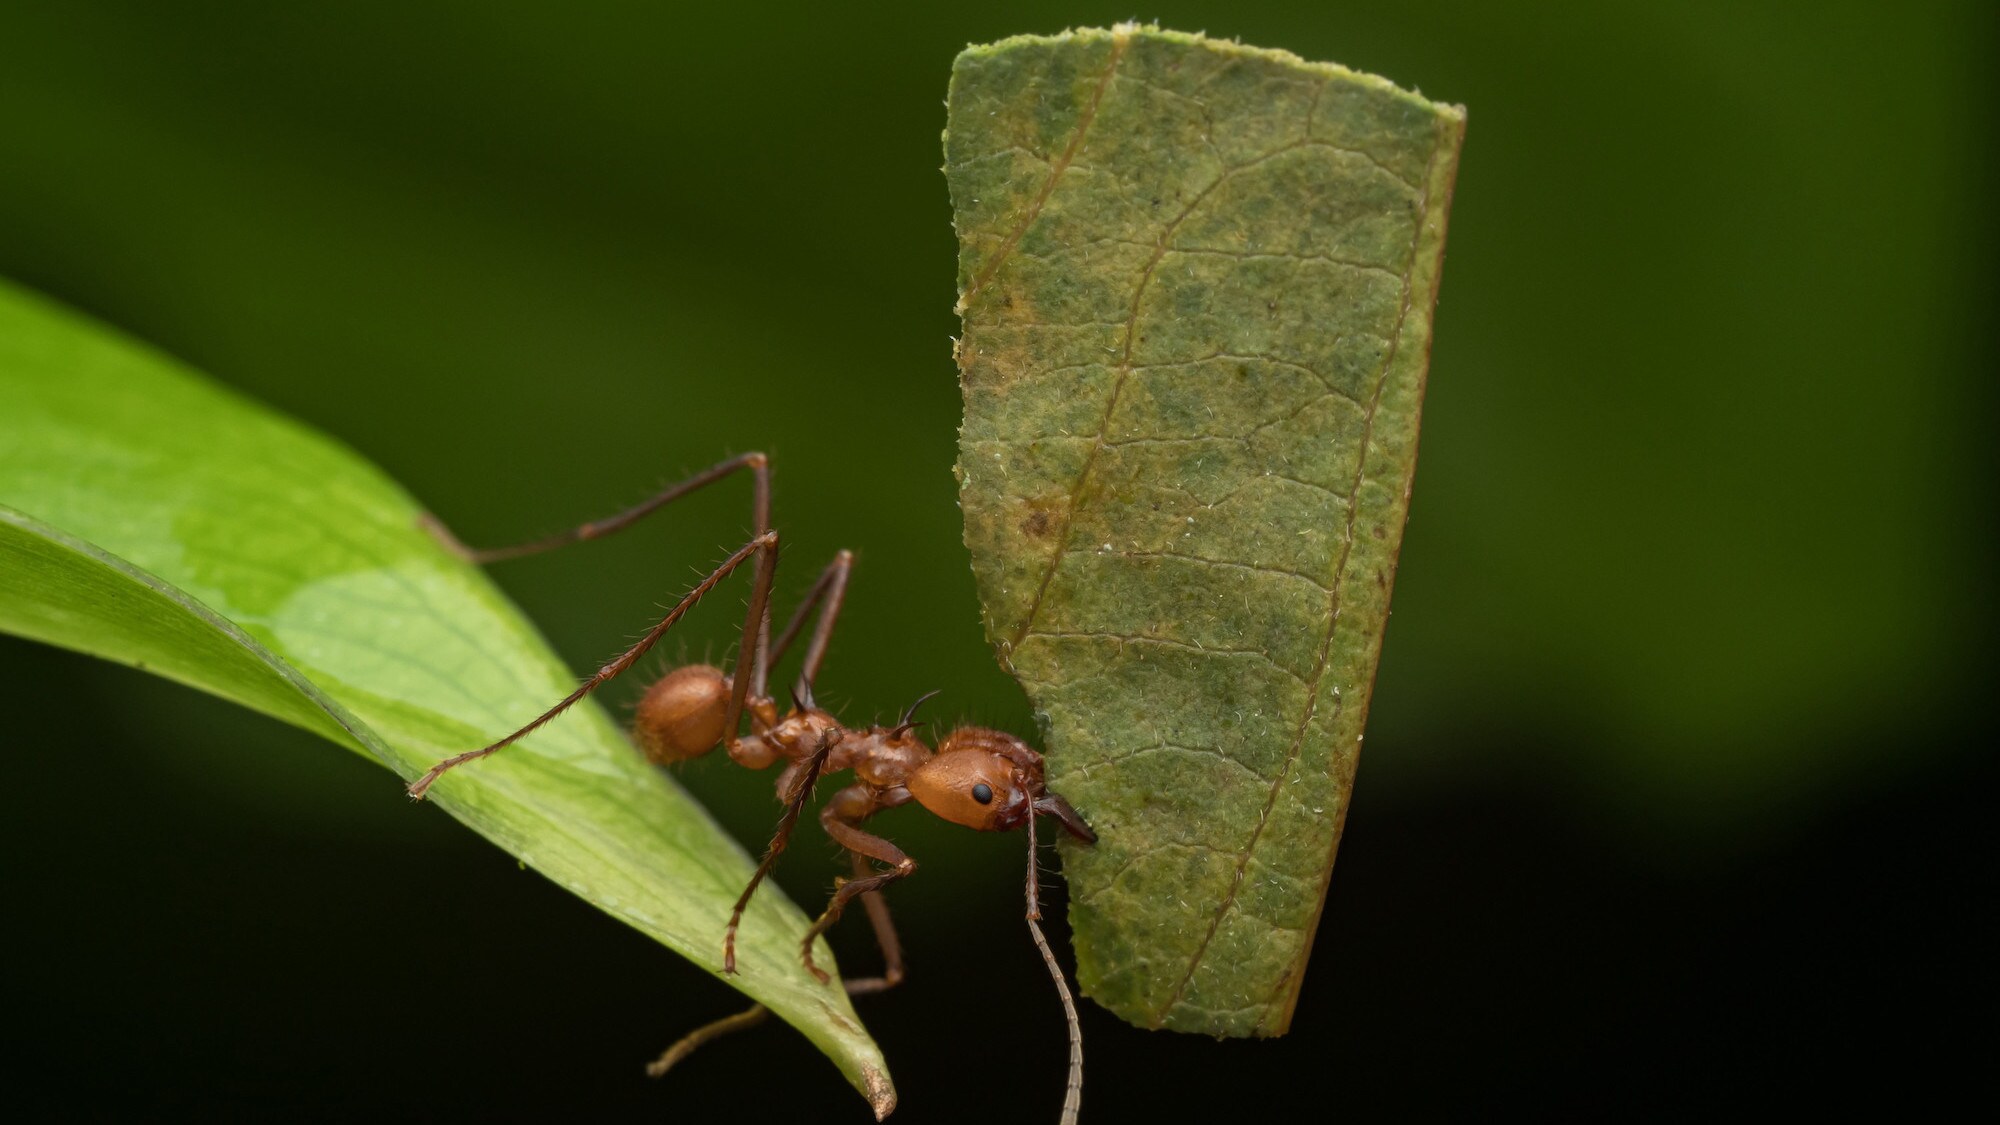 A leafcutter ant carrying a leaf section while standing on the edge of a leaf is featured in the "Welcome to the Jungle" episode of “A Real Bug’s Life.” (National Geographic/Jeremy Squire)